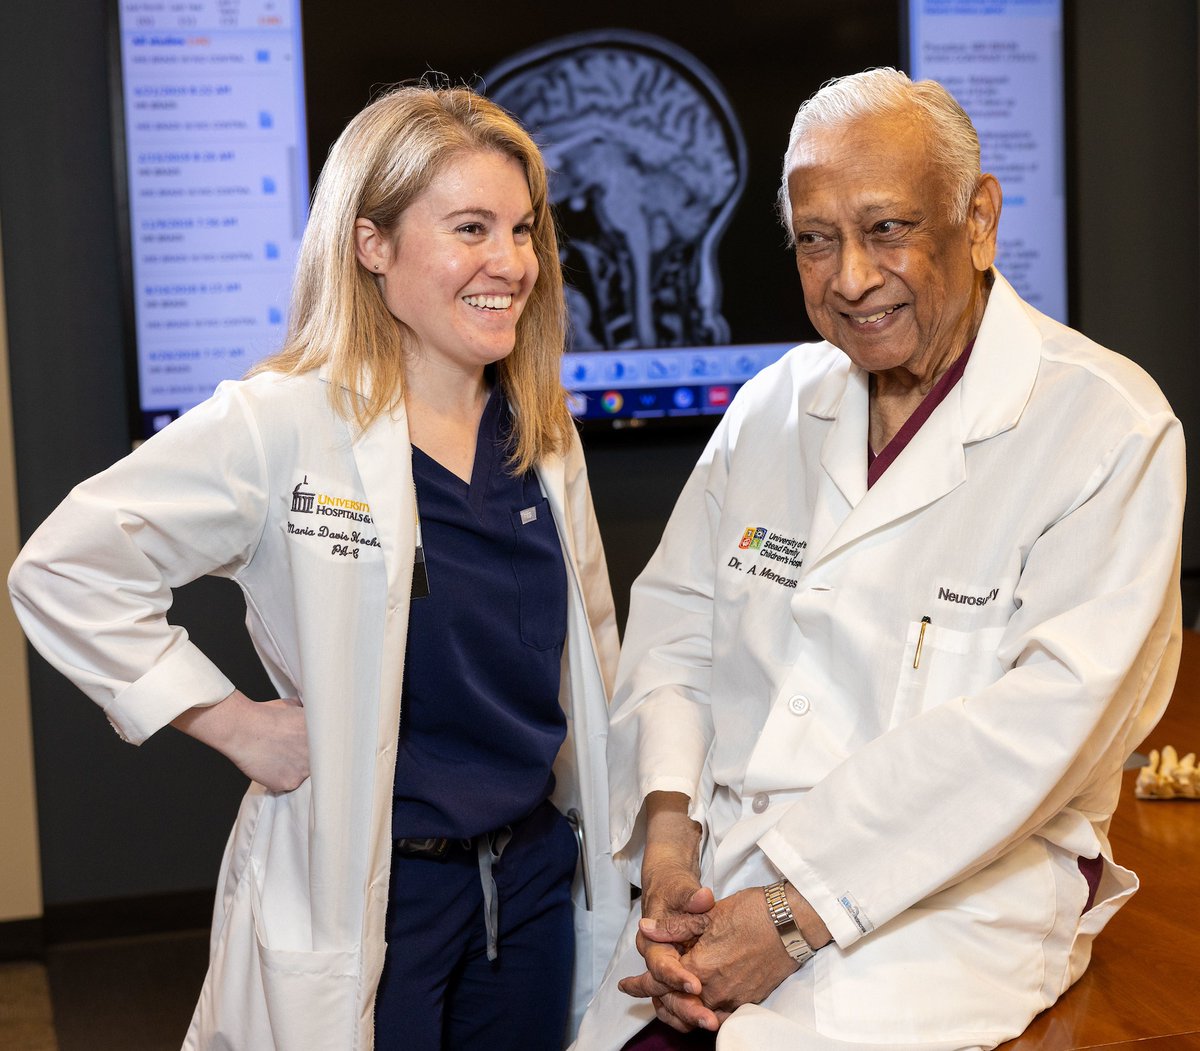 In 1999, Arnold Menezes, MD, treated 8-year-old Maria Davis, who had a brain tissue defect and a cervical spine disorder. Today, Maria is a certified physician assistant with UI Health Care. Meet this world-renowned neurosurgeon with 50 years at @uiowa: spr.ly/6017bRh1c